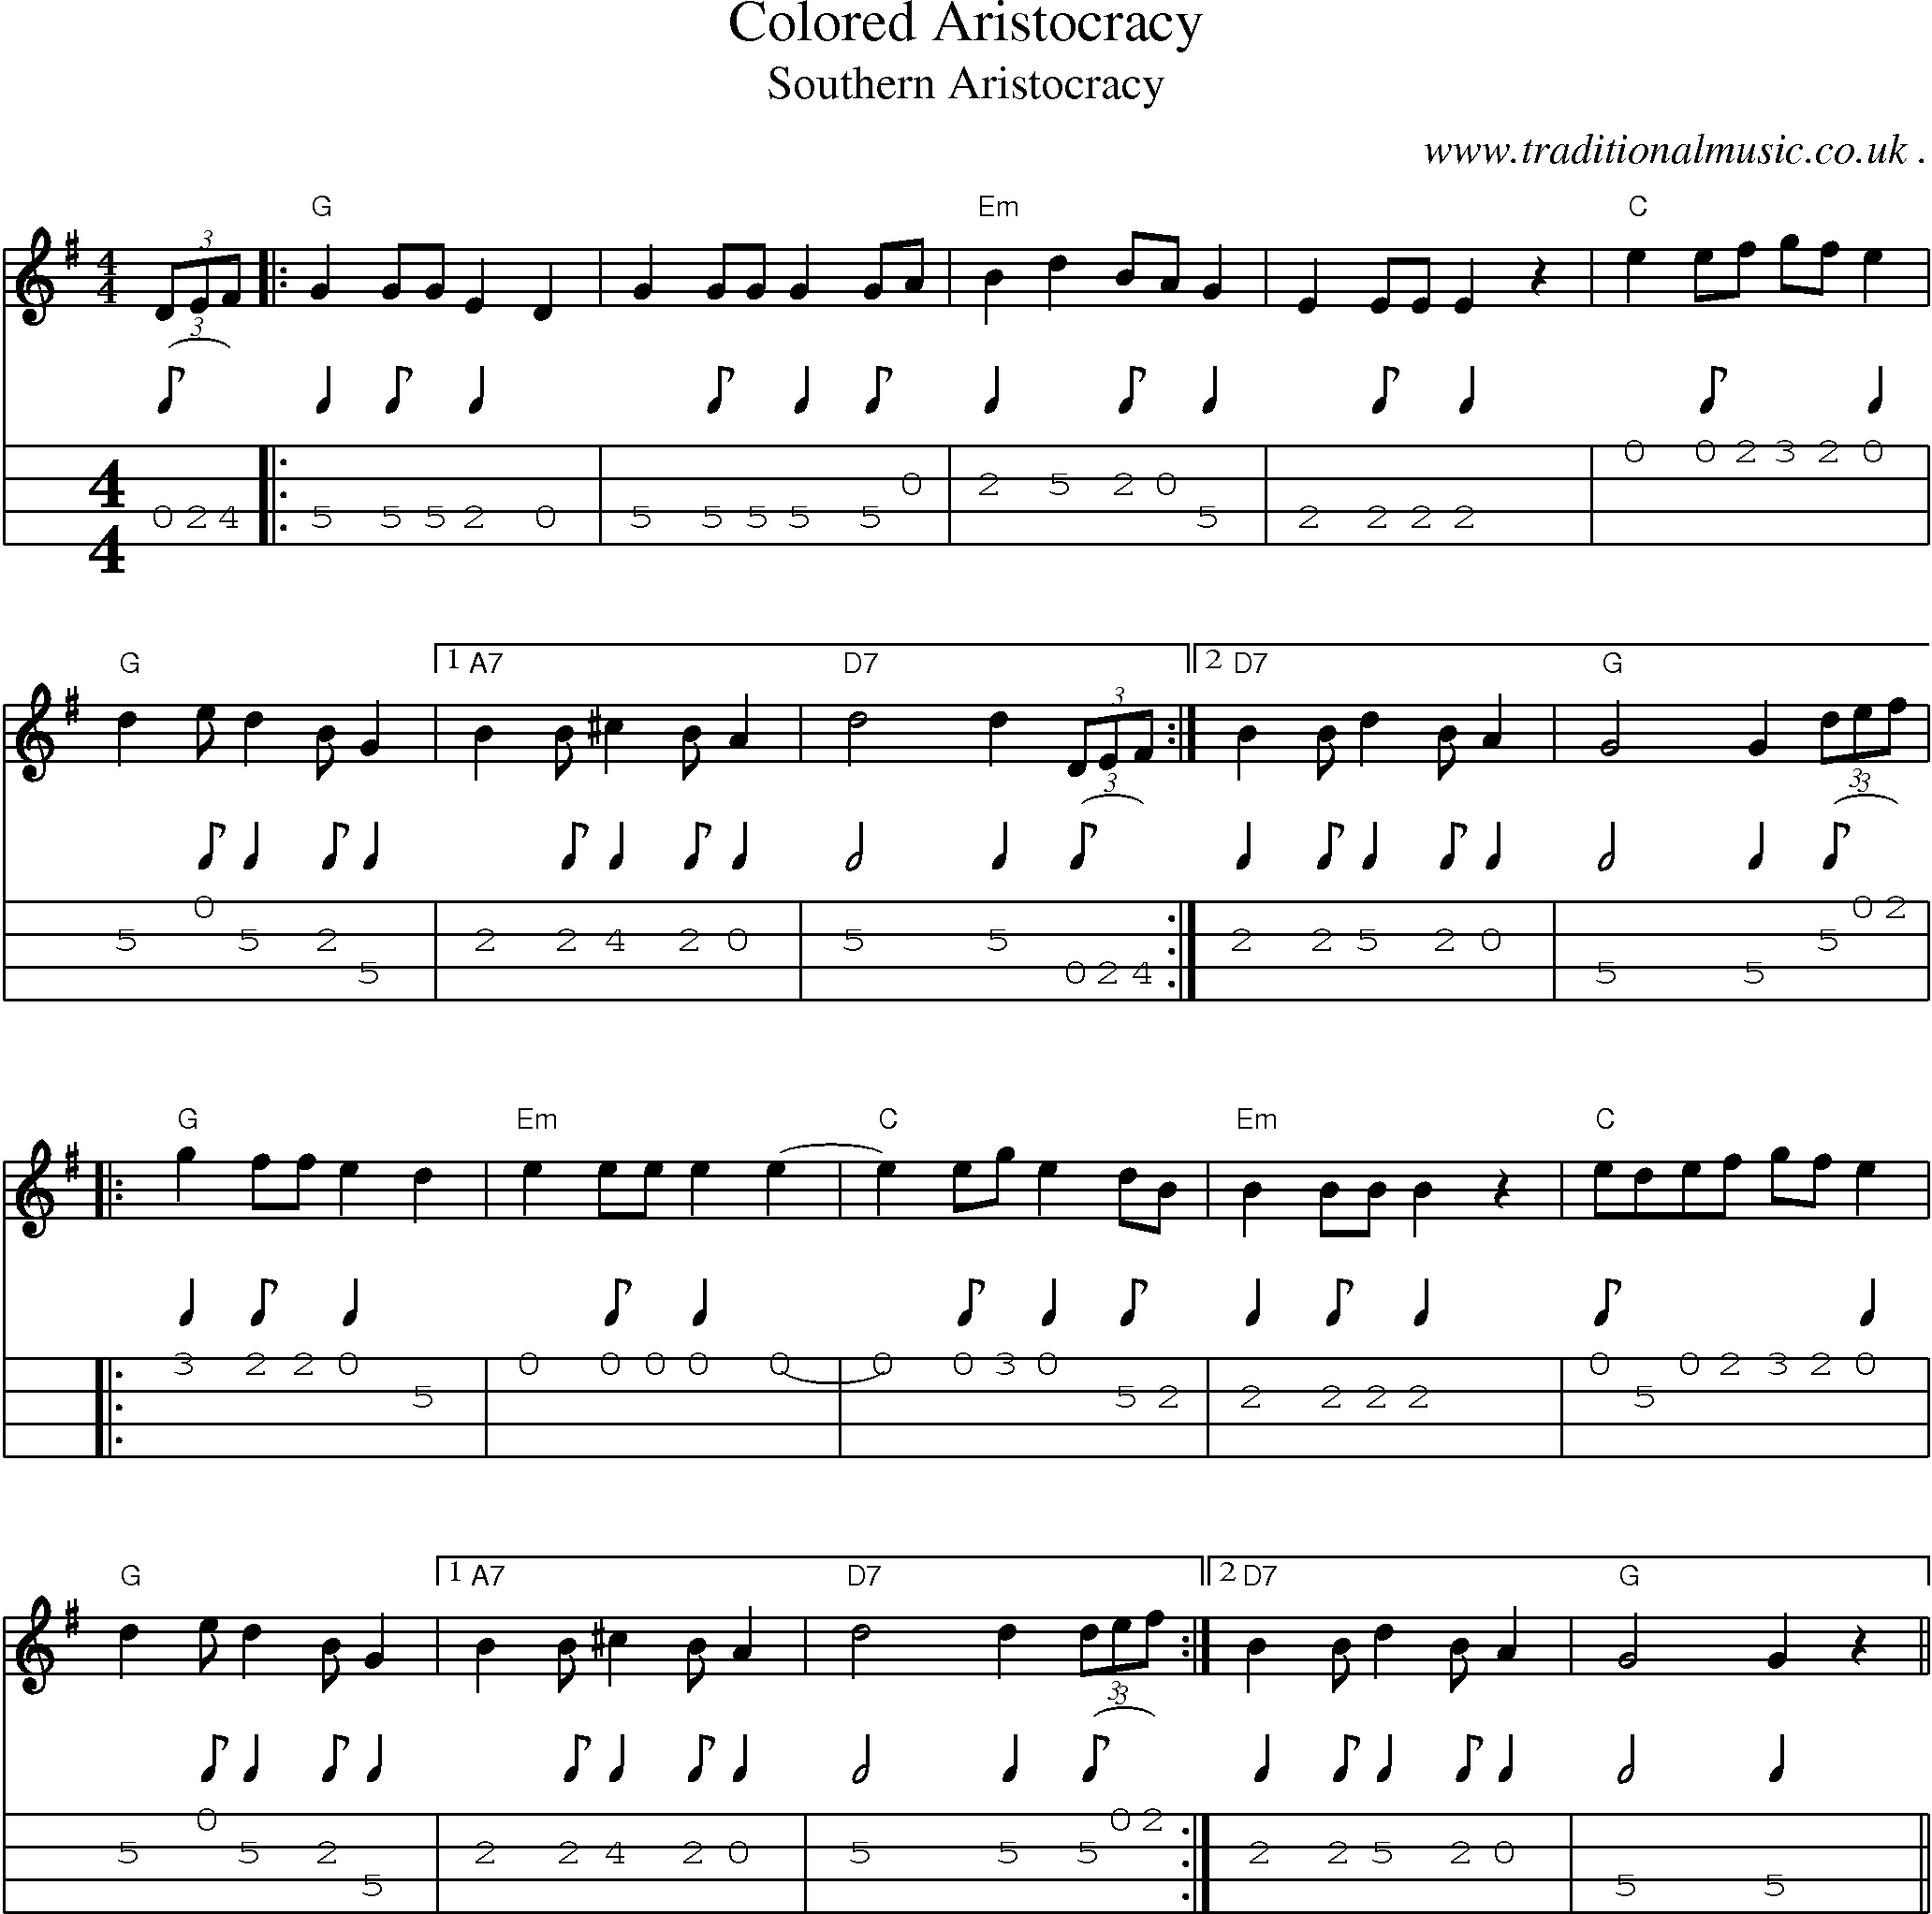 Music Score and Mandolin Tabs for Colored Aristocracy